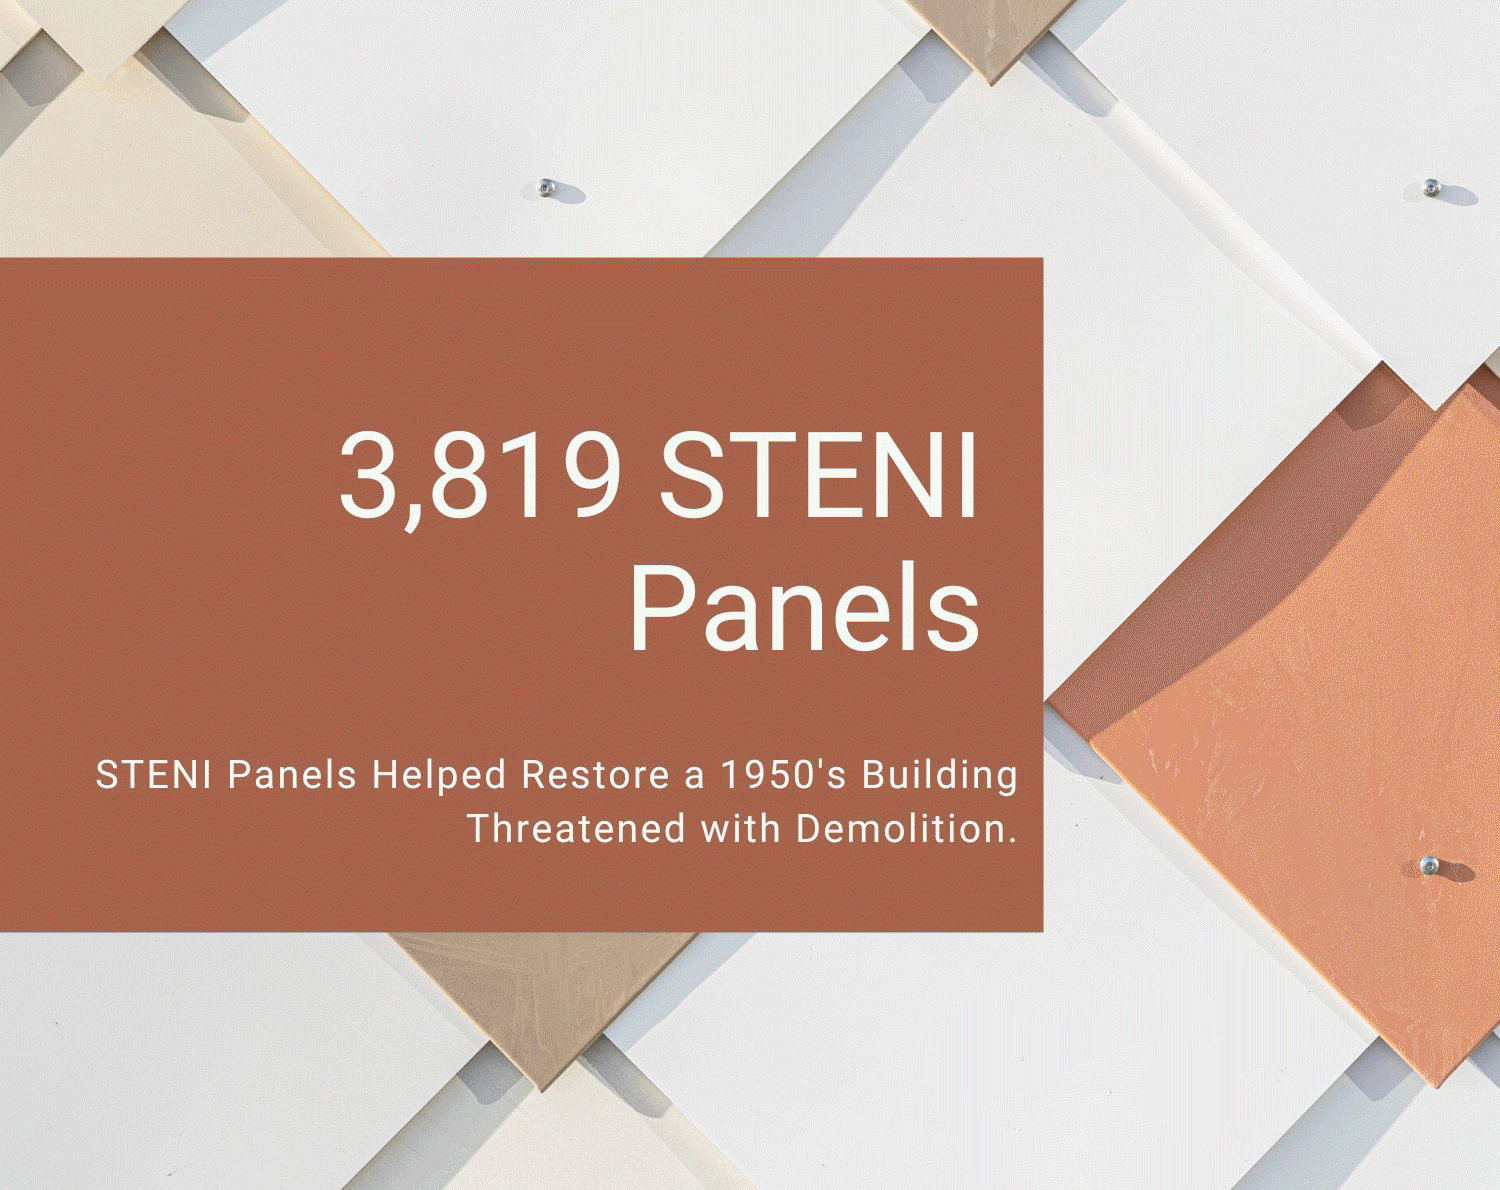 Recycled Steni Rainscreen Panels Revive 1950’s Building